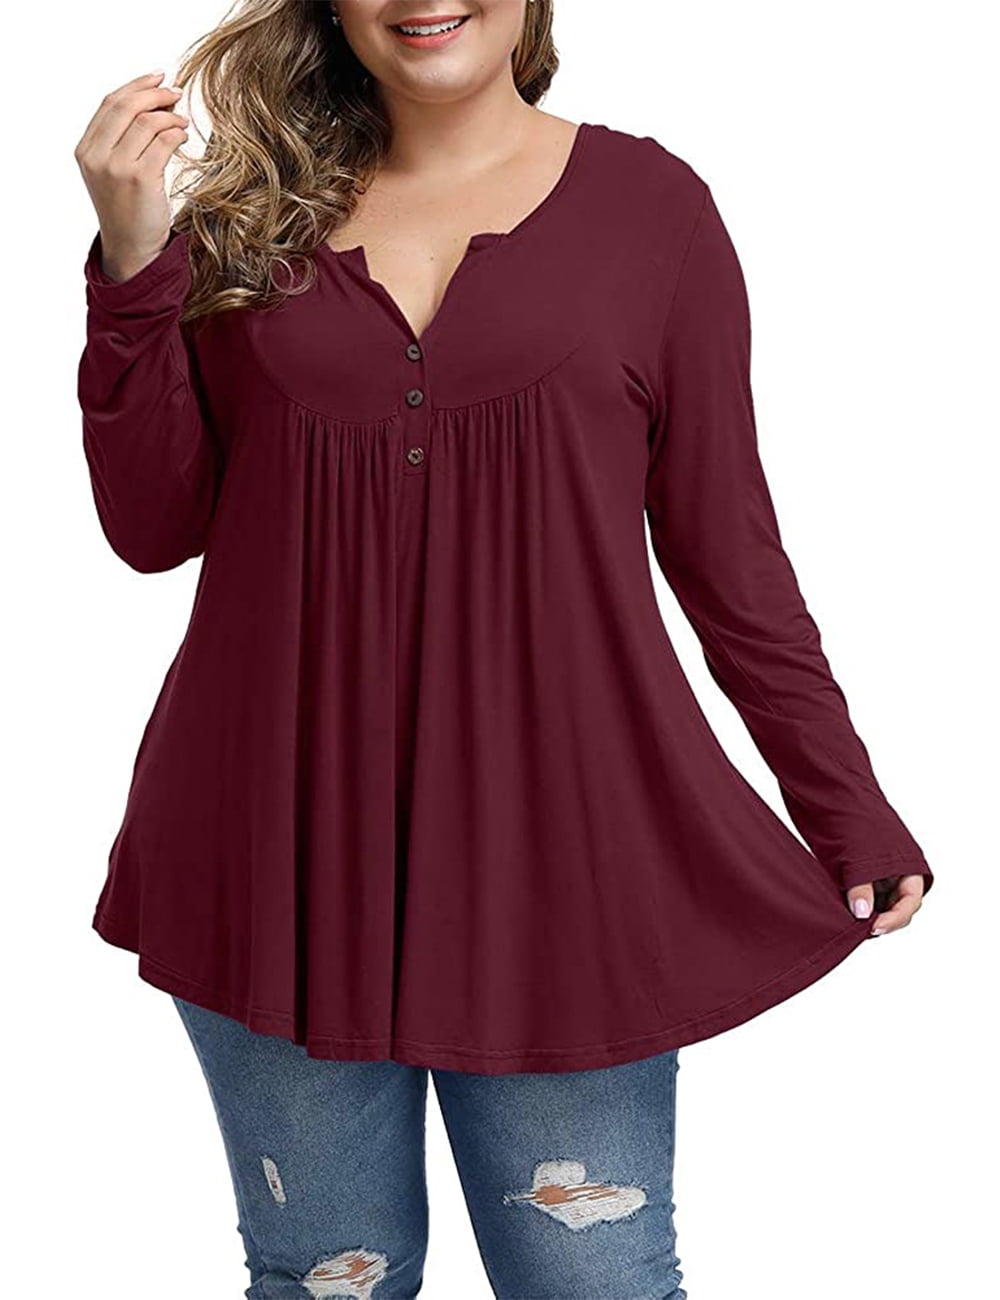 Women's Plus Size Loose V-Neck Short Sleeve Solid Top Pleated Blouse T-shirt